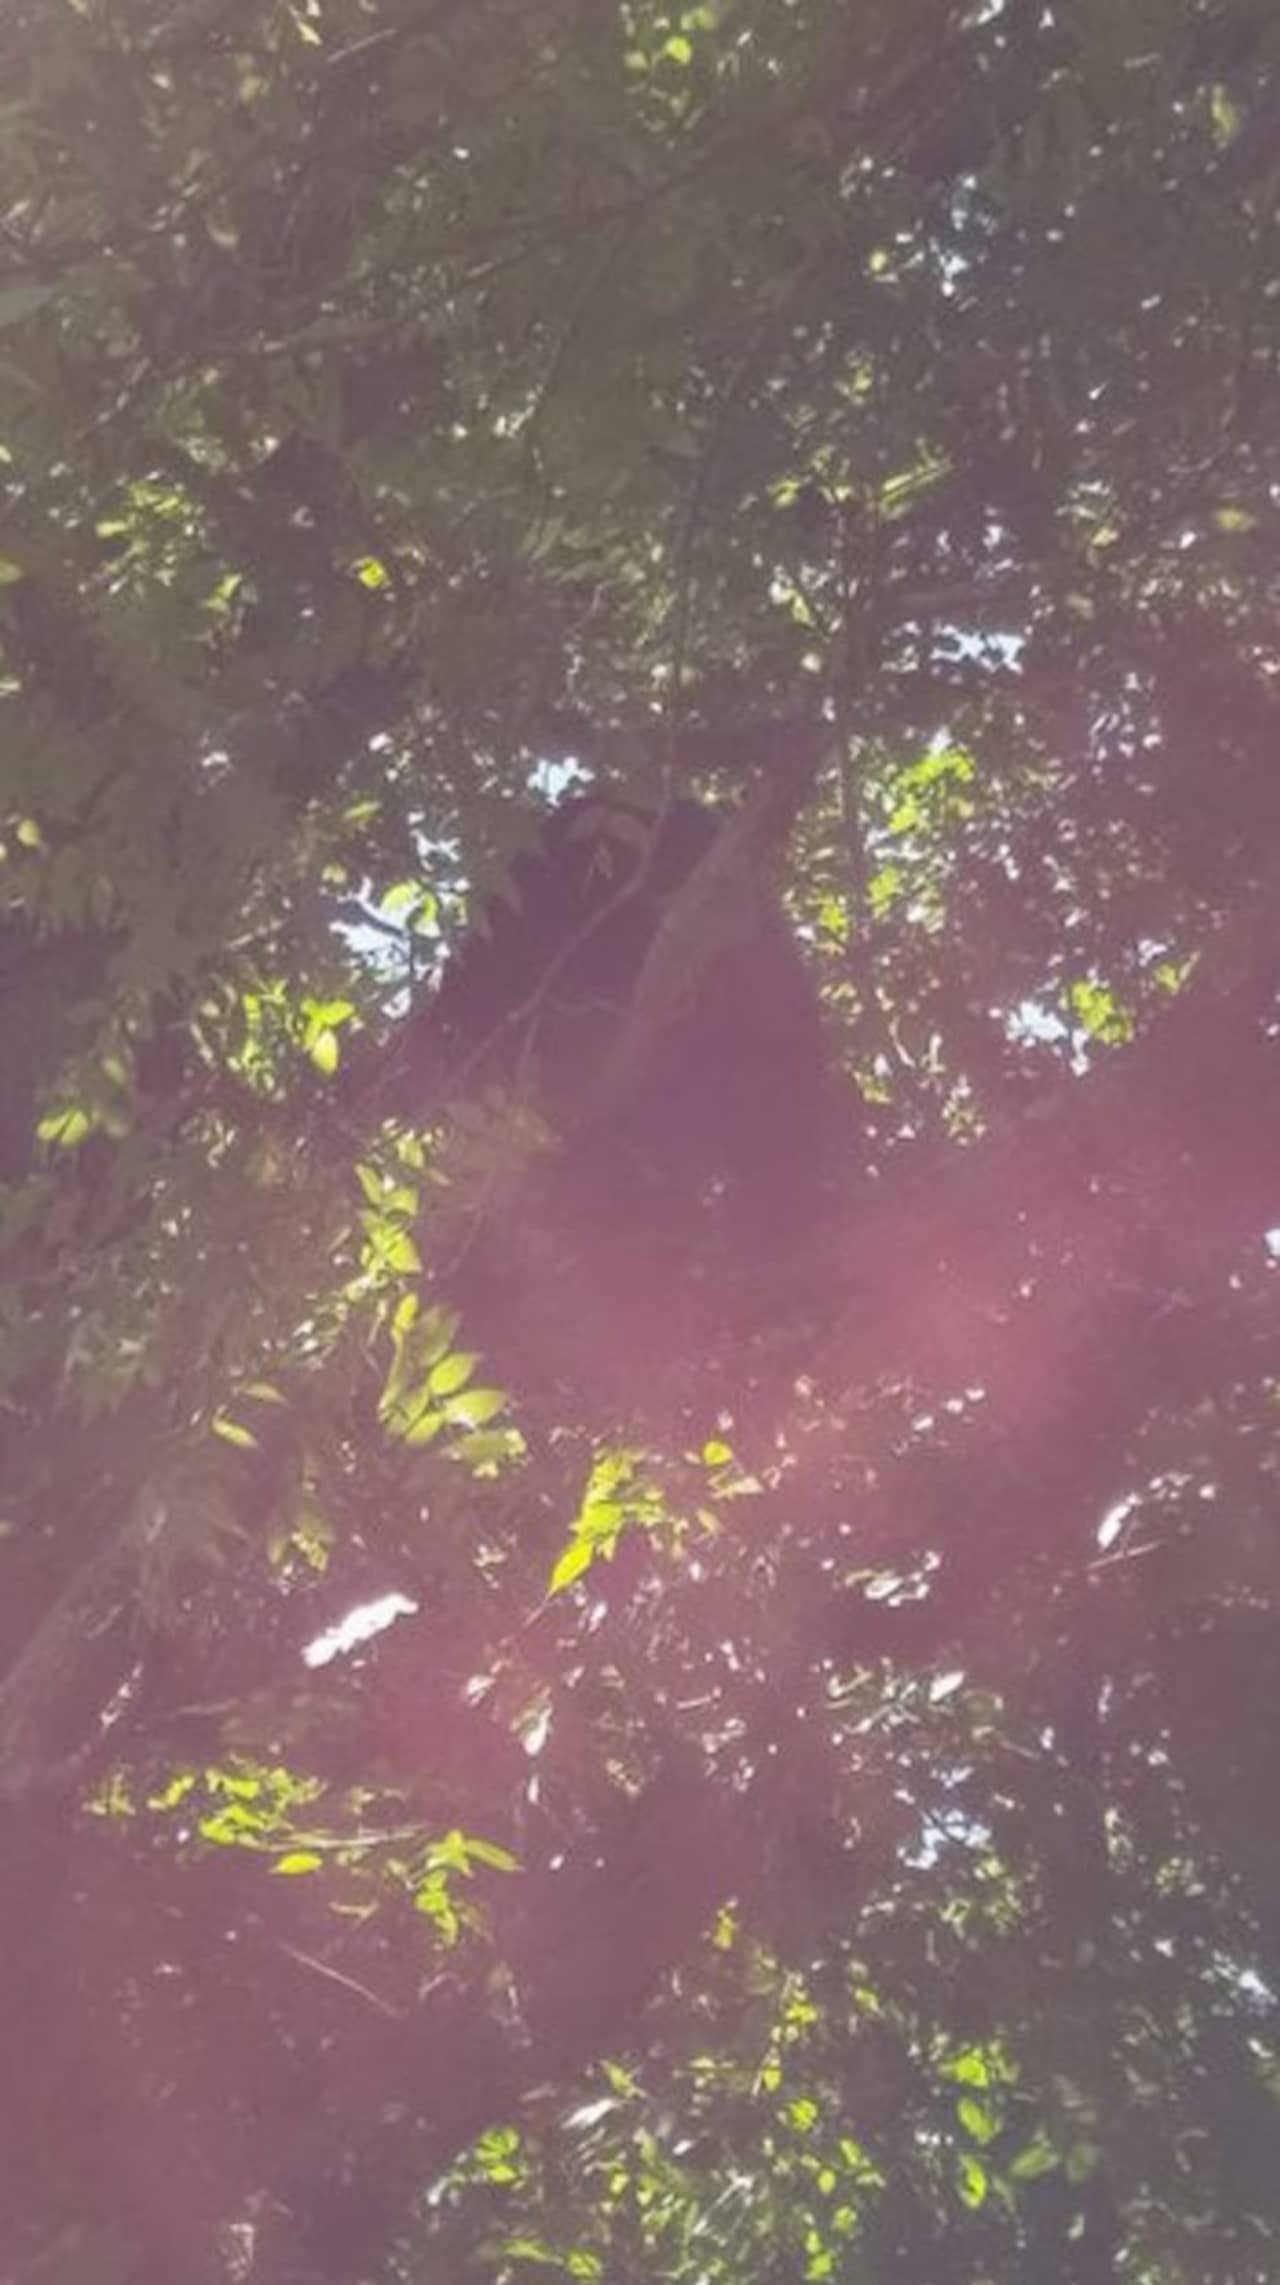 A bear is up in a tree in Danbury on Friday morning.